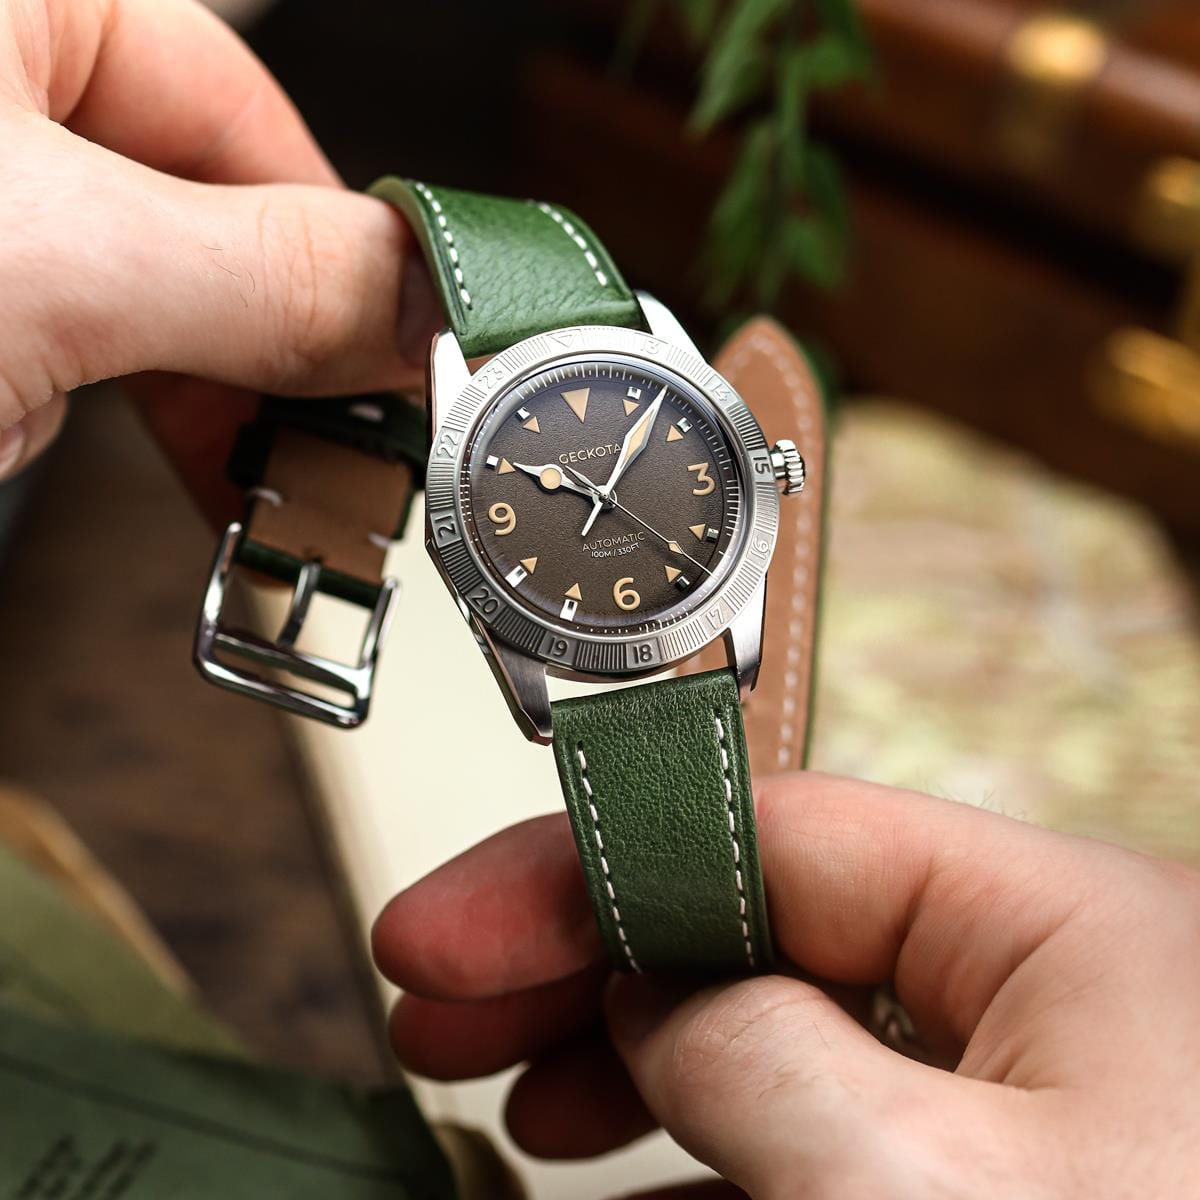 Brixham Special Buckle Classic Leather Watch Strap - Green